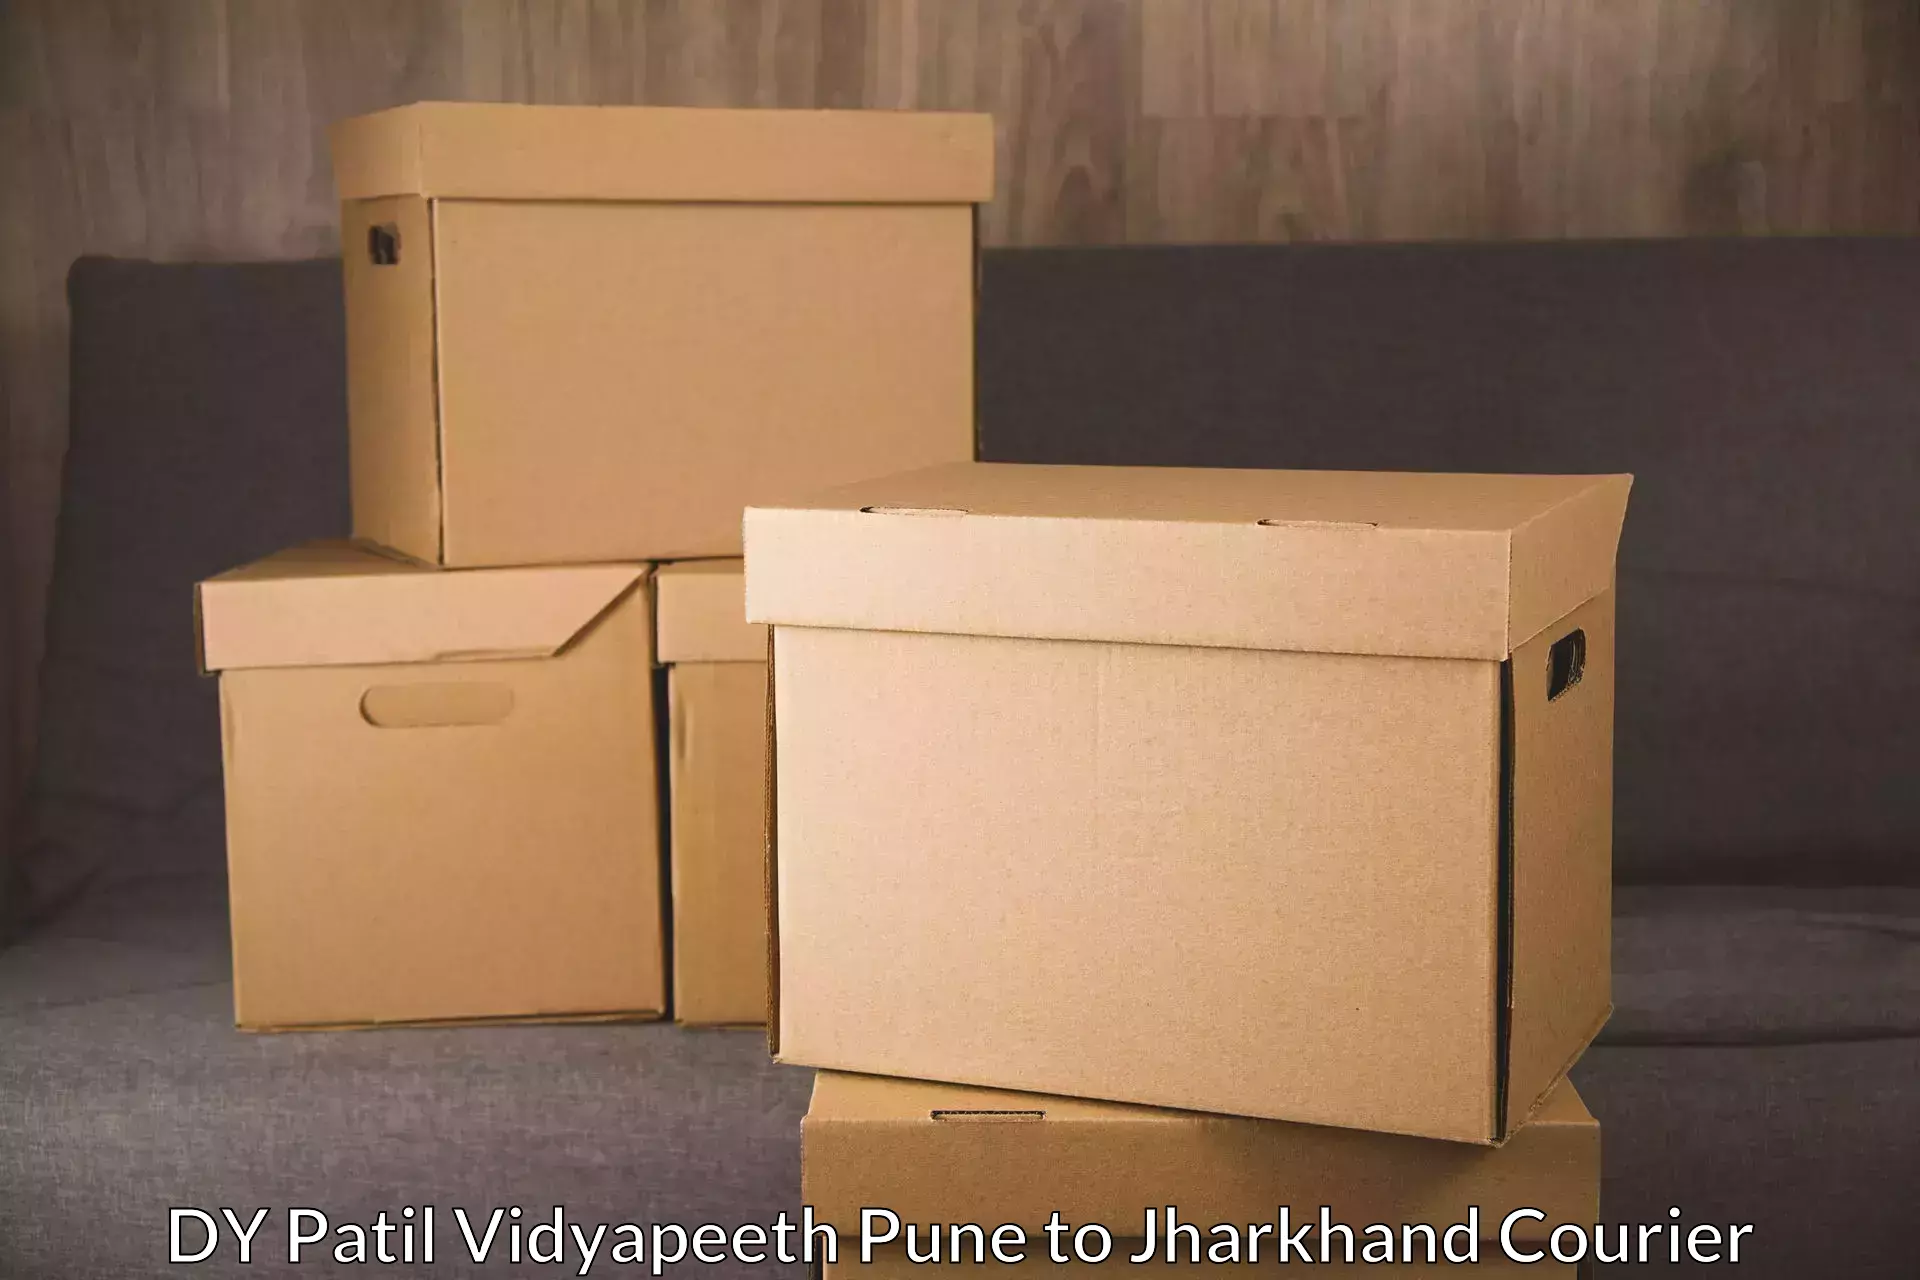 On-demand courier DY Patil Vidyapeeth Pune to Simdega